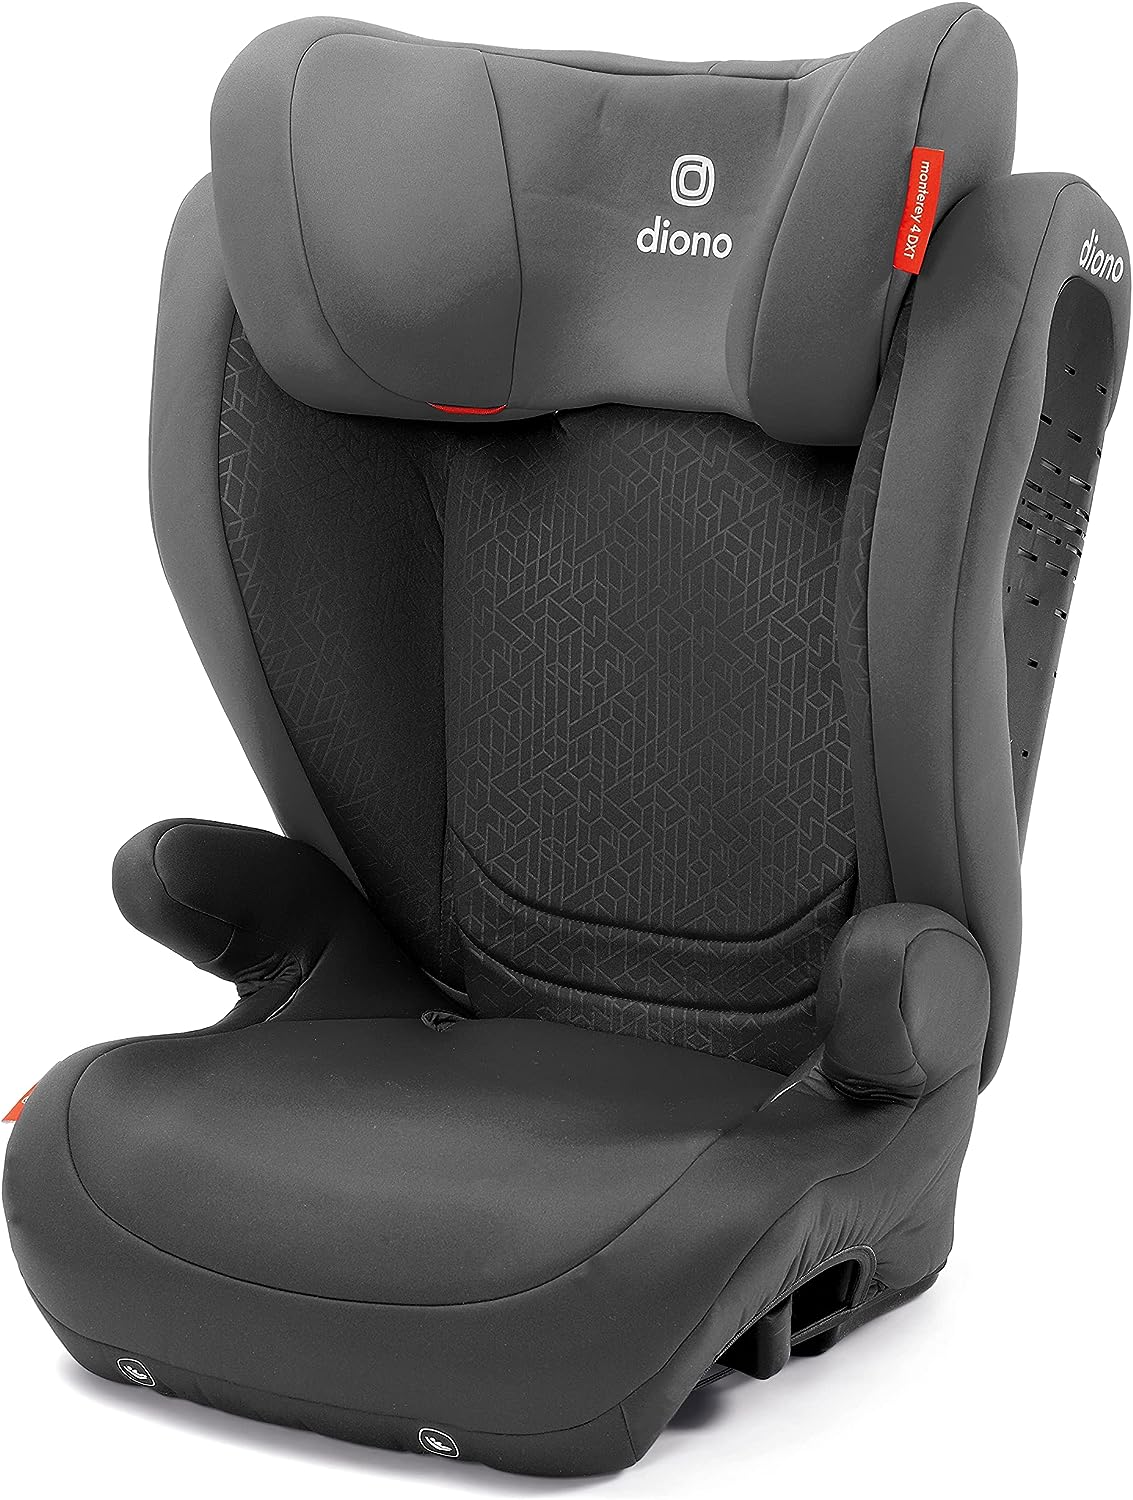 Diono Monterey 4DXT 2 in 1 High Back Booster Car Seat with Expandable Height & Width, Enhanced Side Impact Protection, 8 Years 1 Booster, Gray Dark